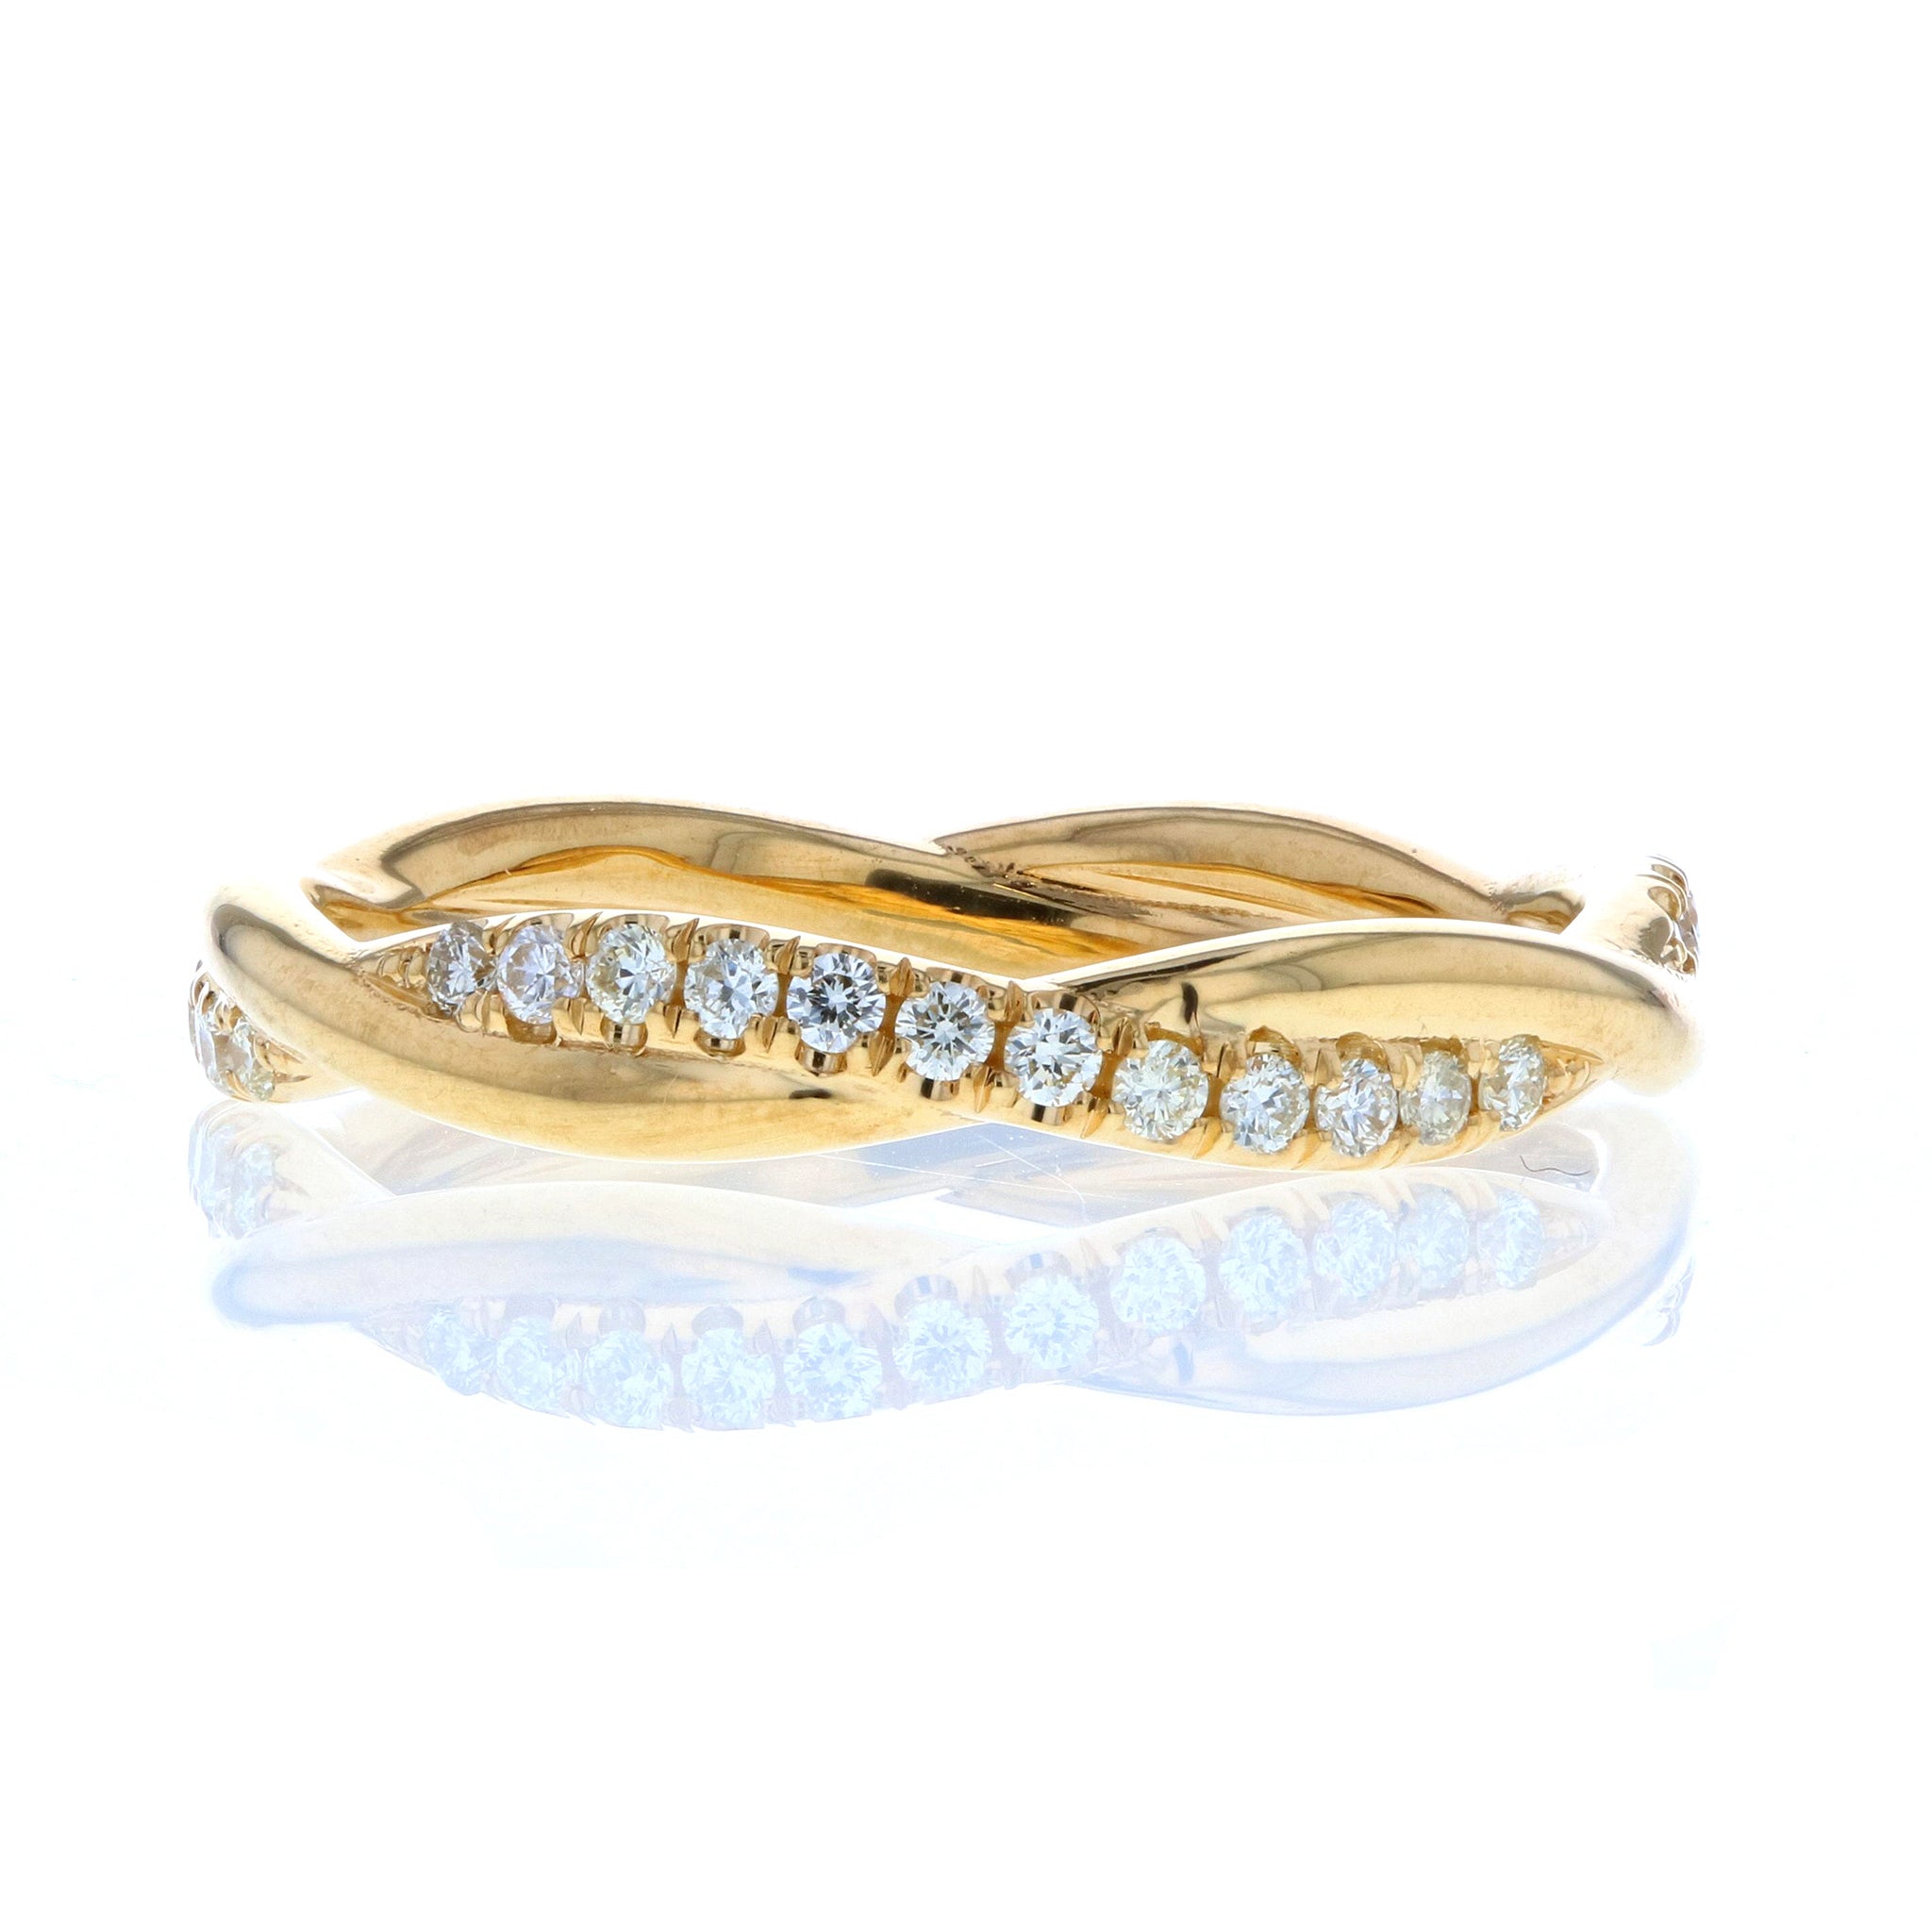 Women's Wedding Band in Yellow Gold with Twisted Shank and Diamond Pave